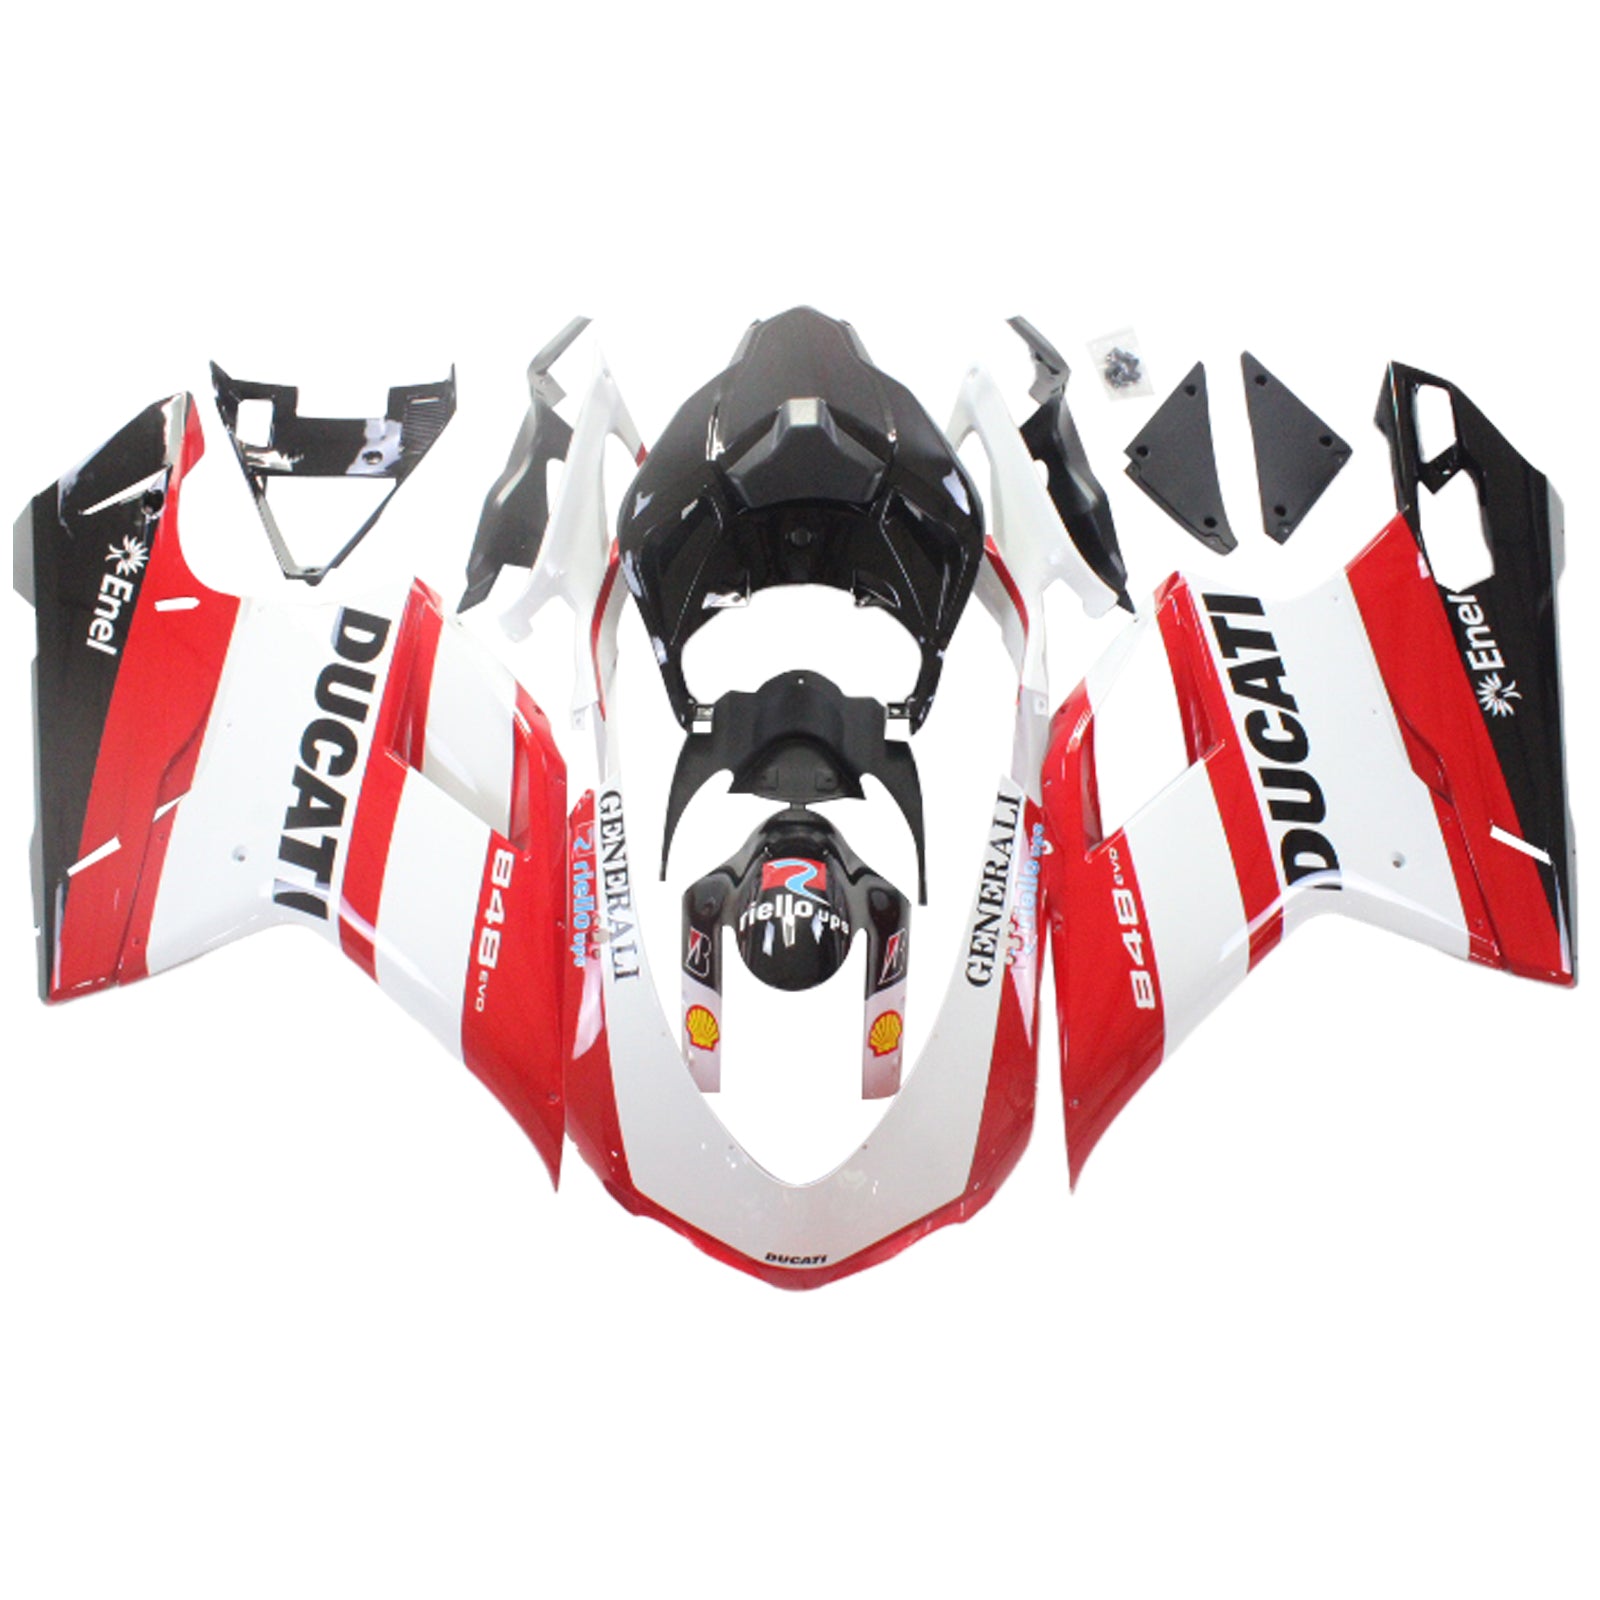 Amotopart All Years Ducati 1098 1198 848 Red&White Style5 Fairing Kit